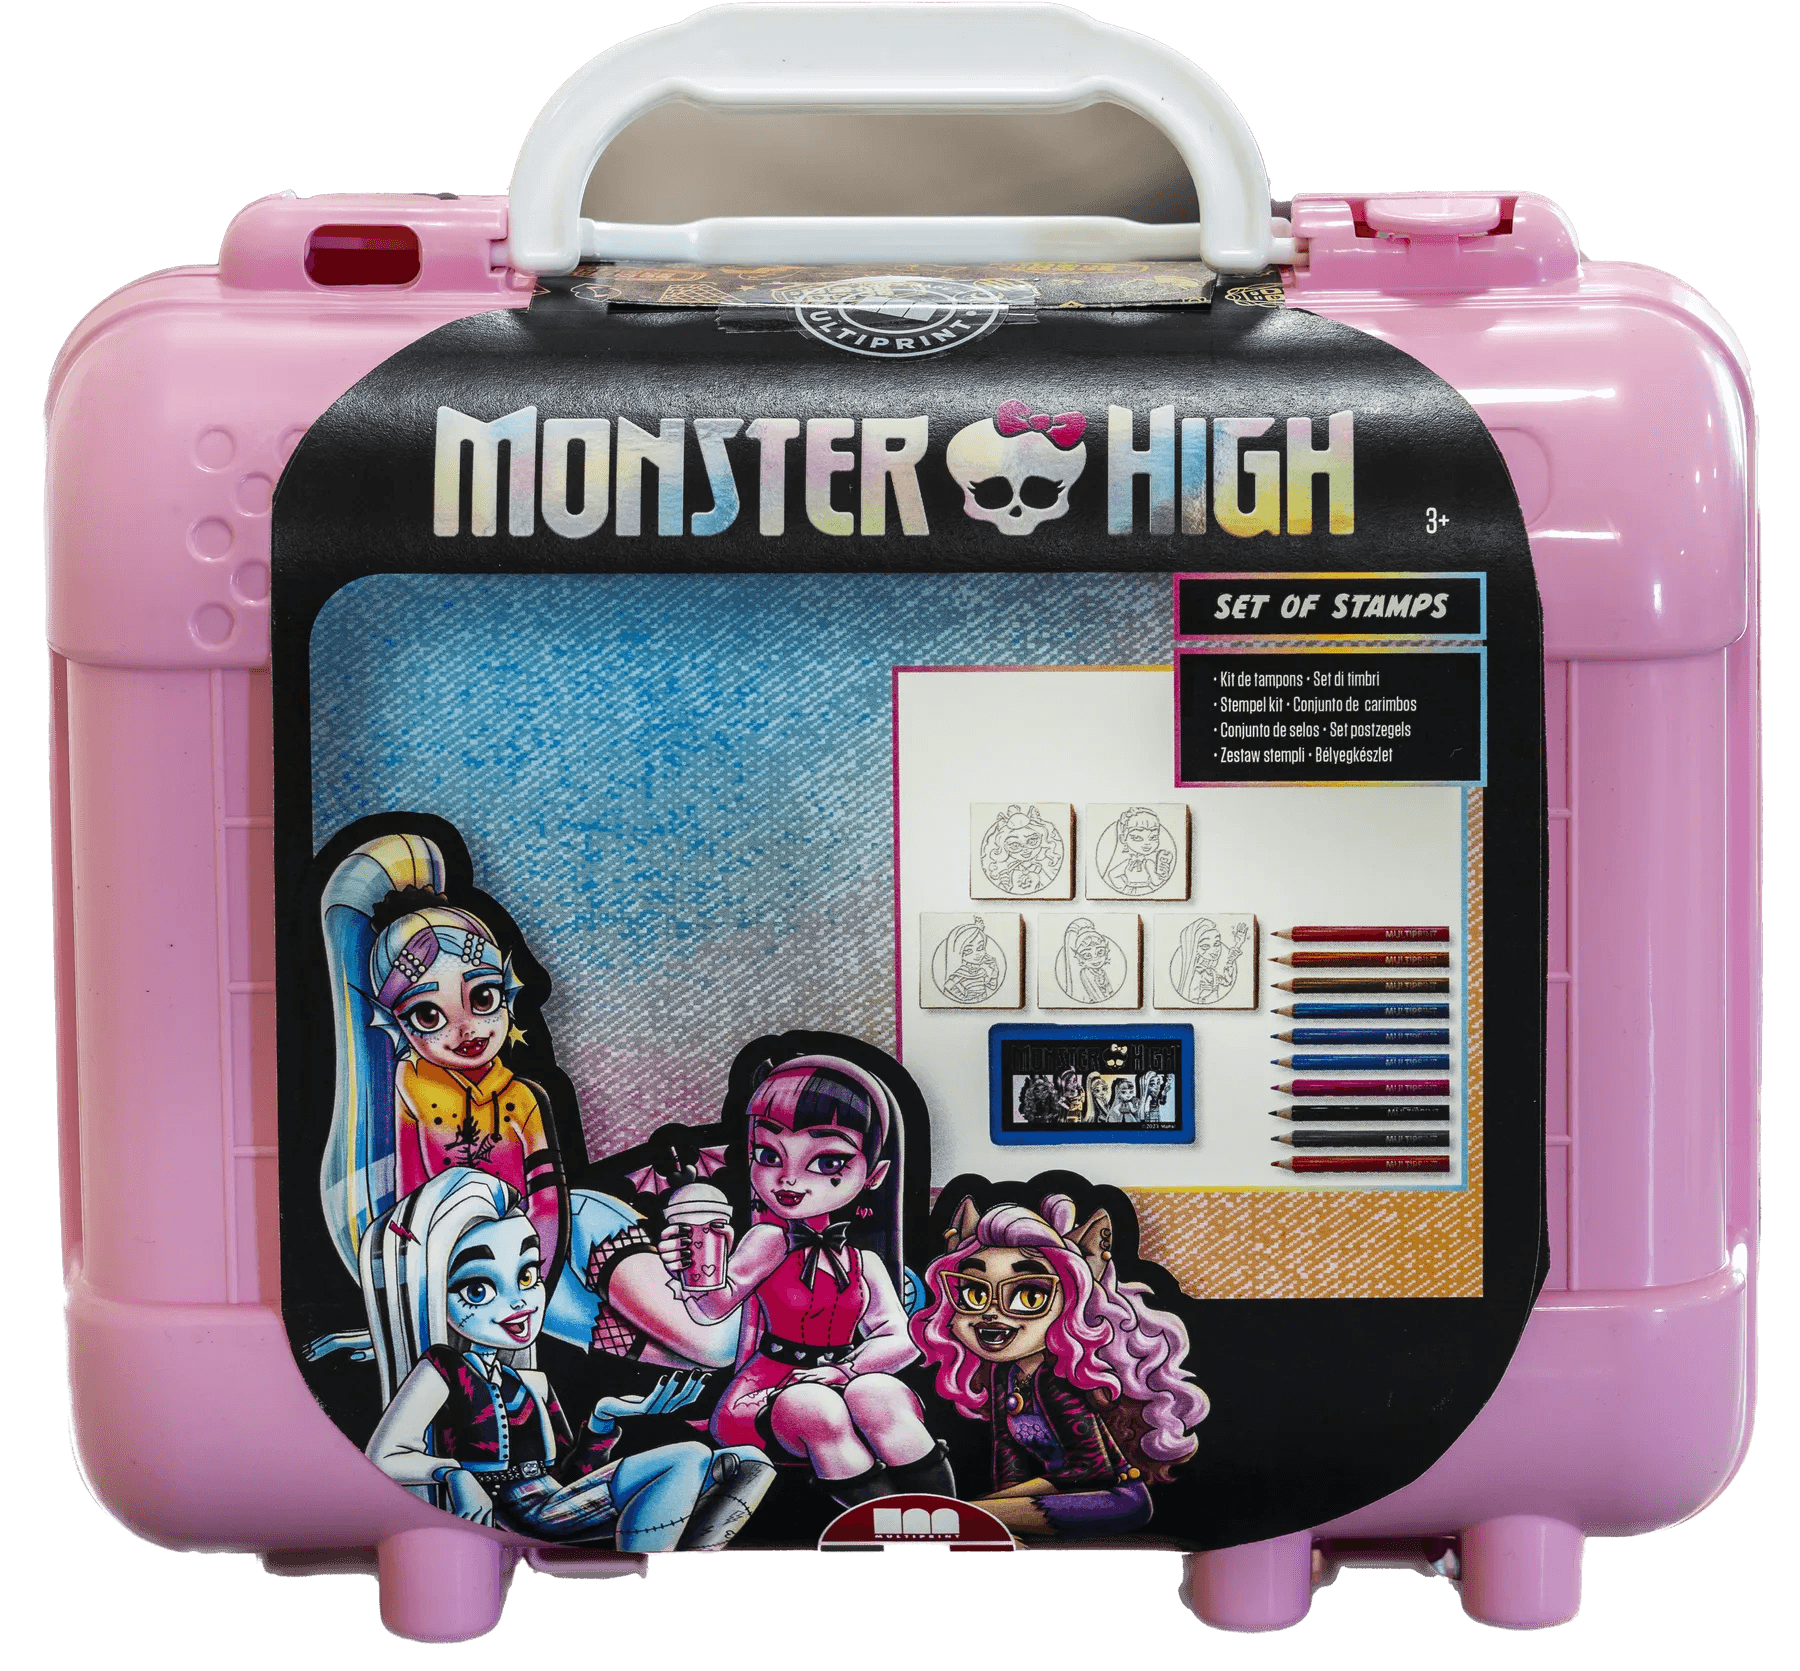 Travel Stitch briefcase with crayons and stamps Multiprint